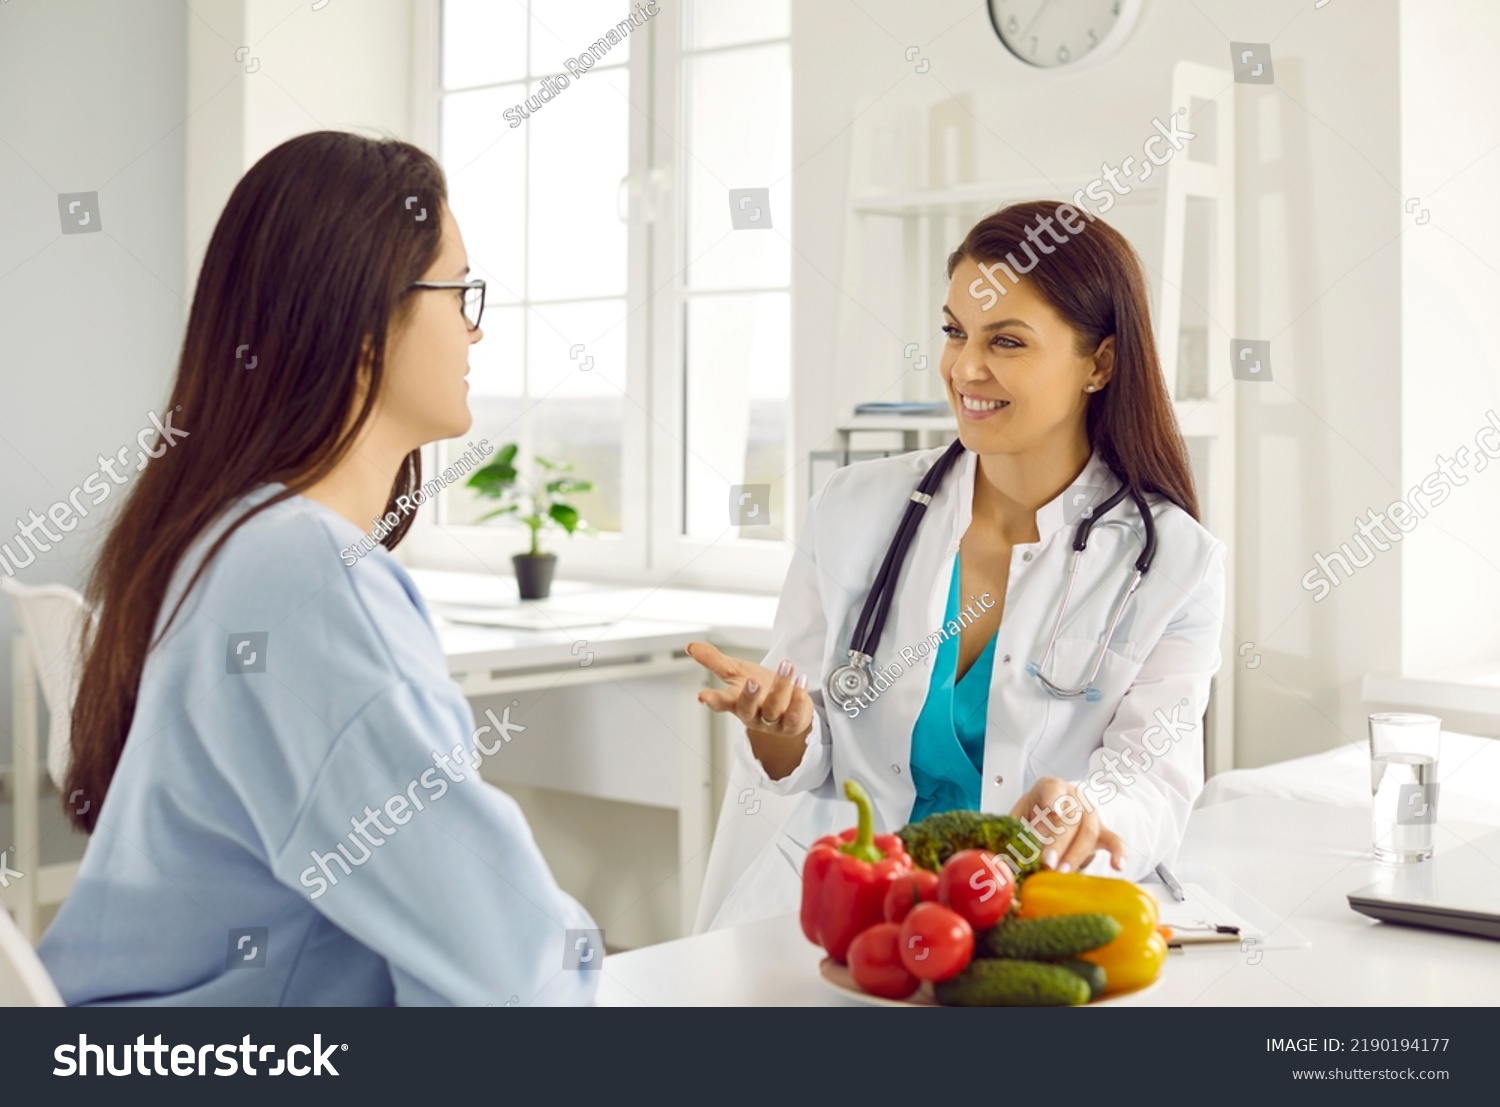 Friendly female nutritionist advises woman on diet plan and talk about benefits of raw vegetables. Doctor consults young female patient in hospital office. Concept of healthy eating and food science #2190194177